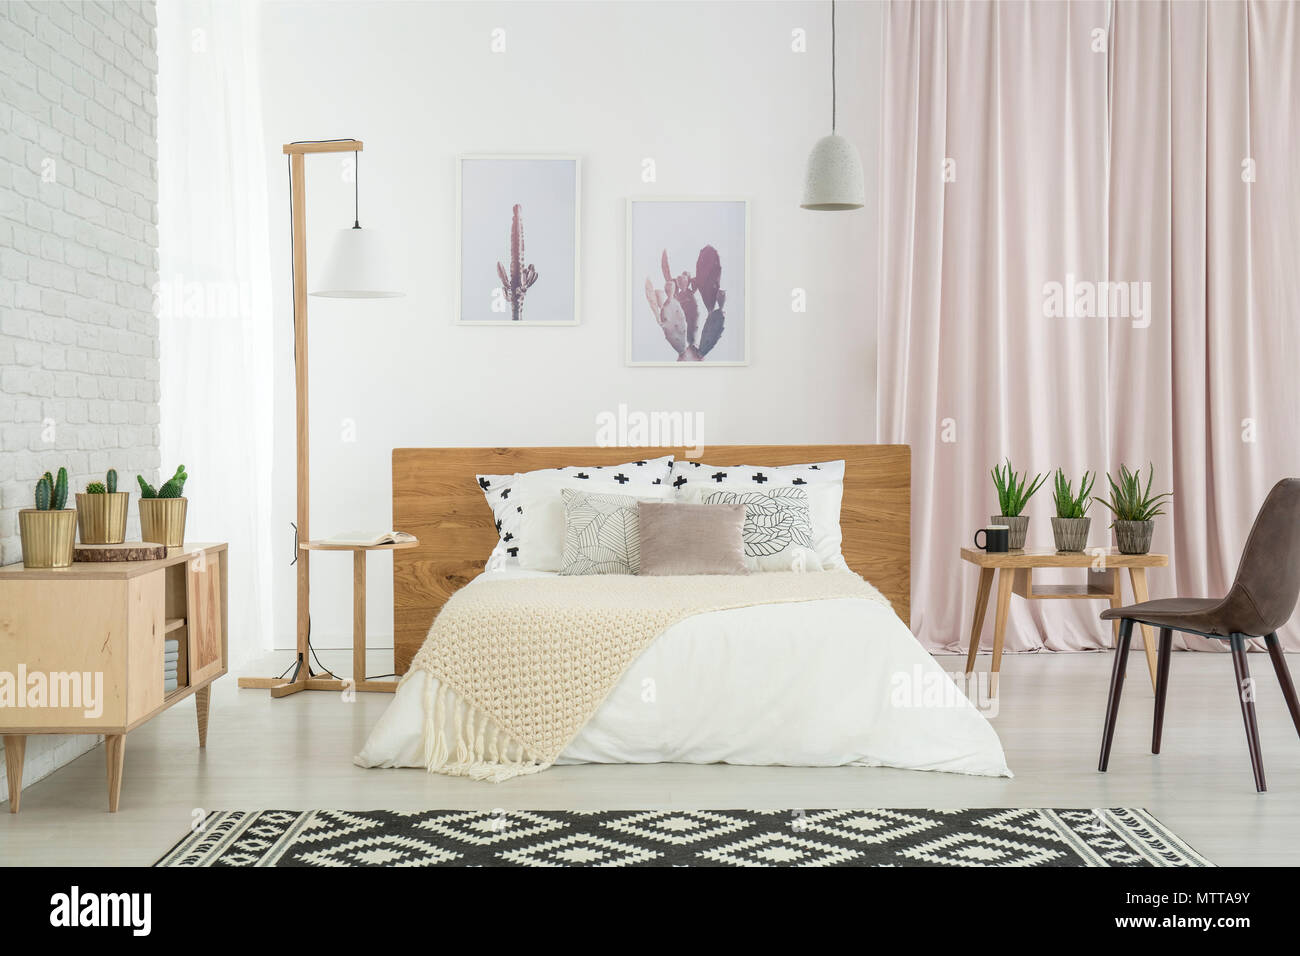 Wooden lamp standing by the bed with patterned pillows in feminine room with cacti in pots Stock Photo